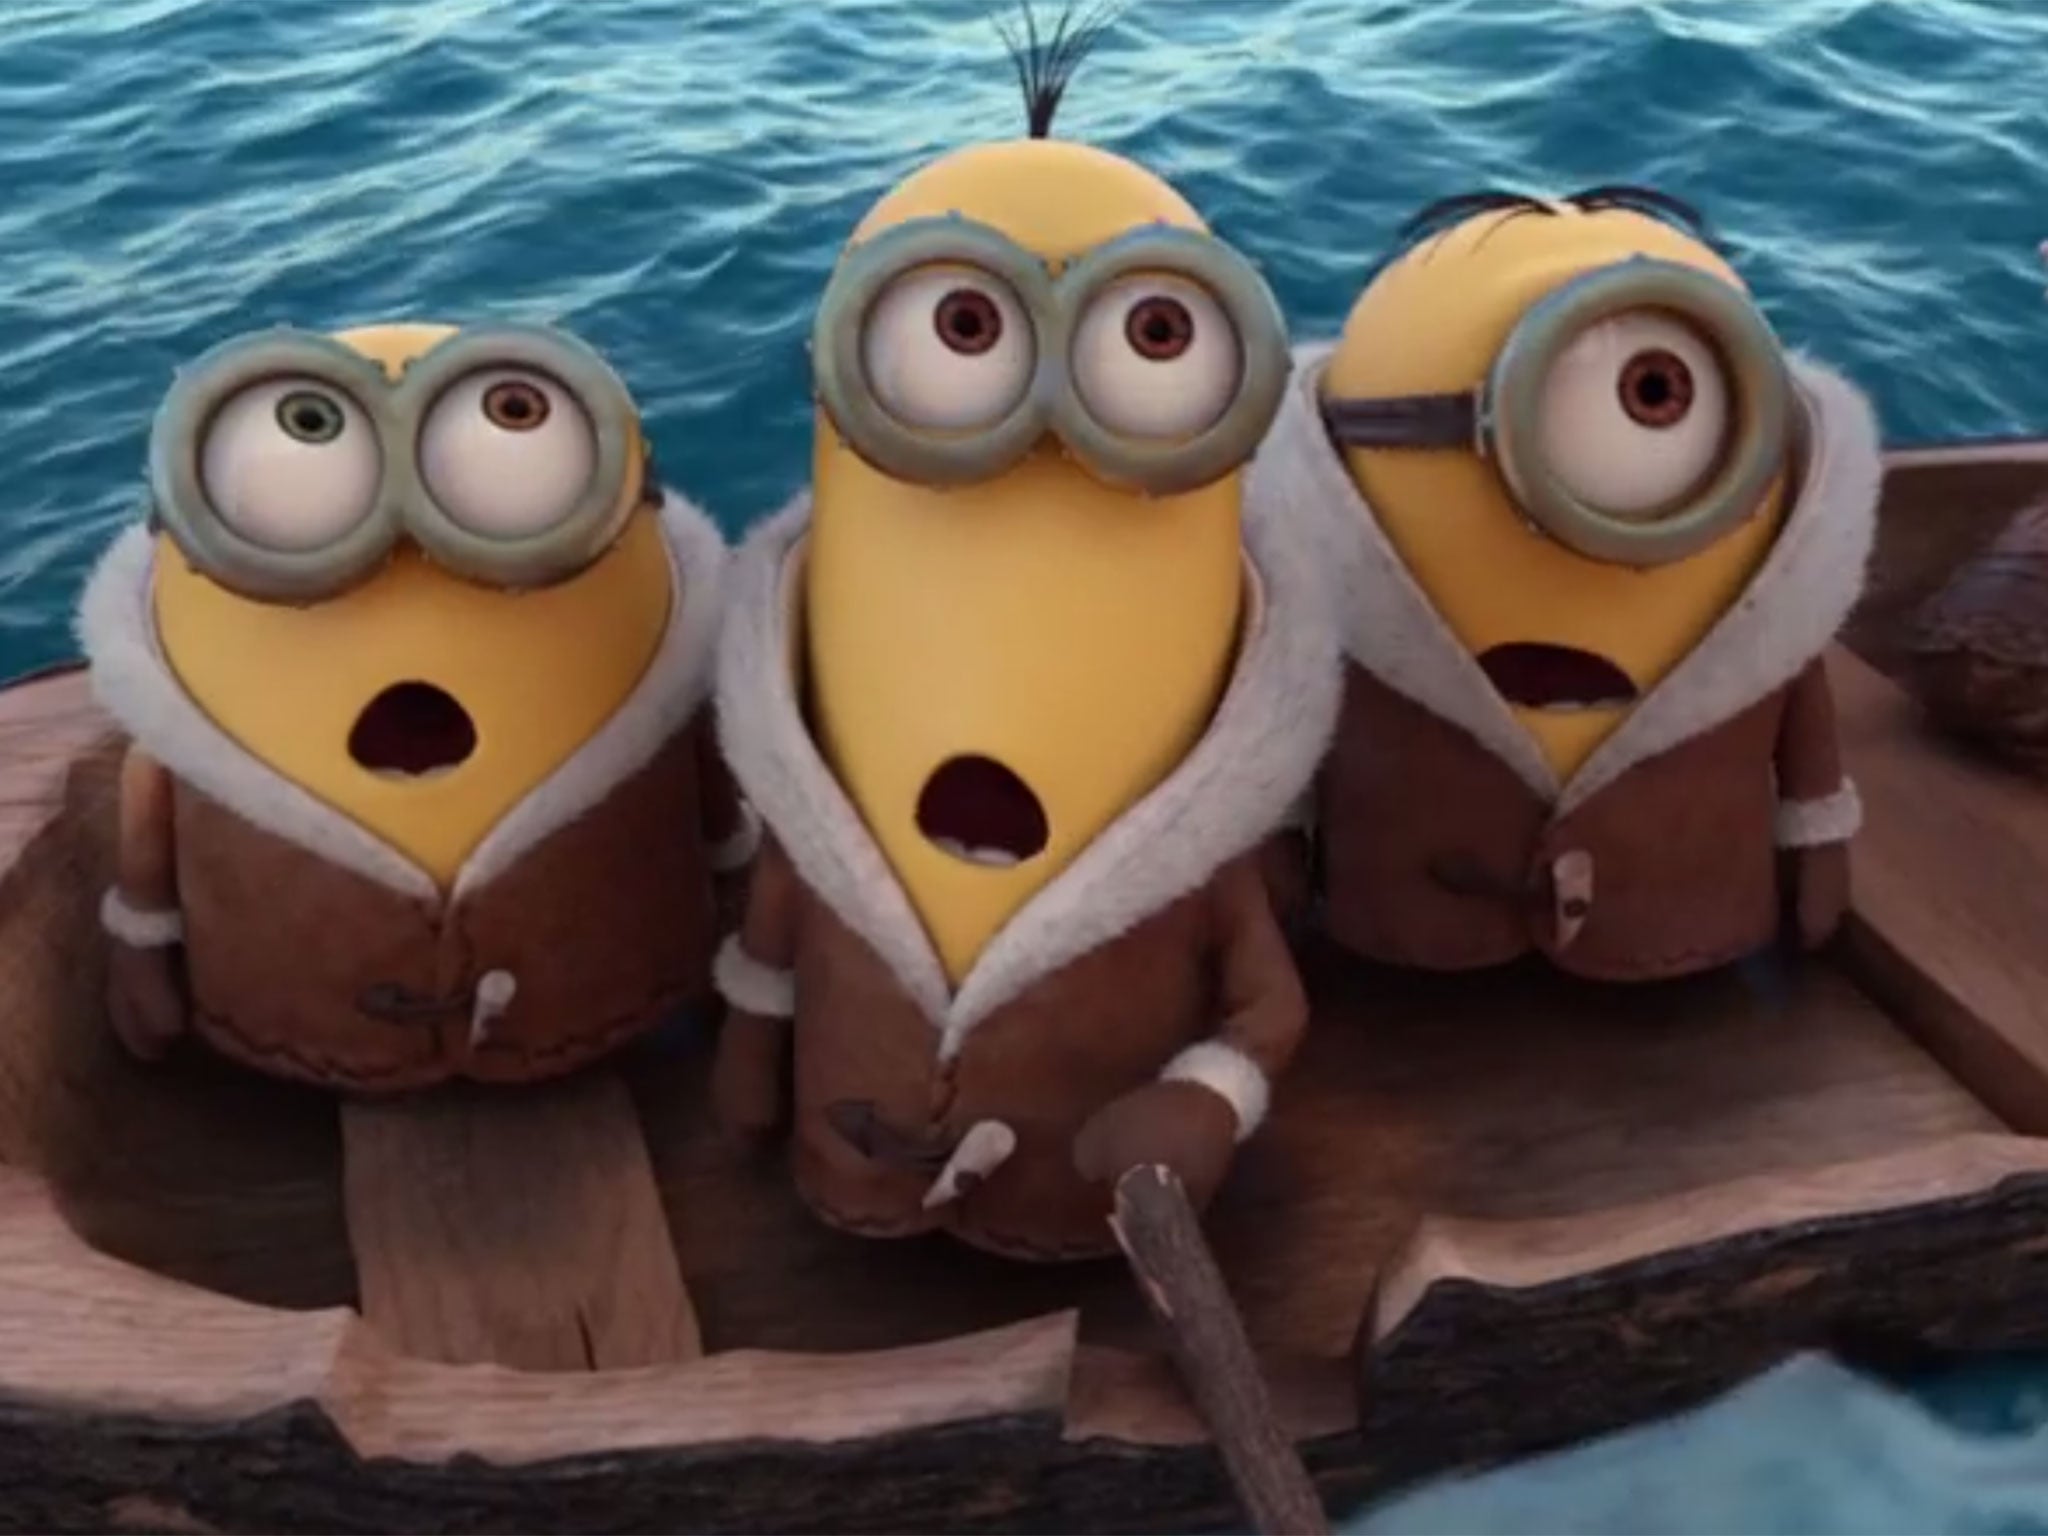 Stuart, Kevin and Bob partake in a daring adventure to find a new evil master in Minions